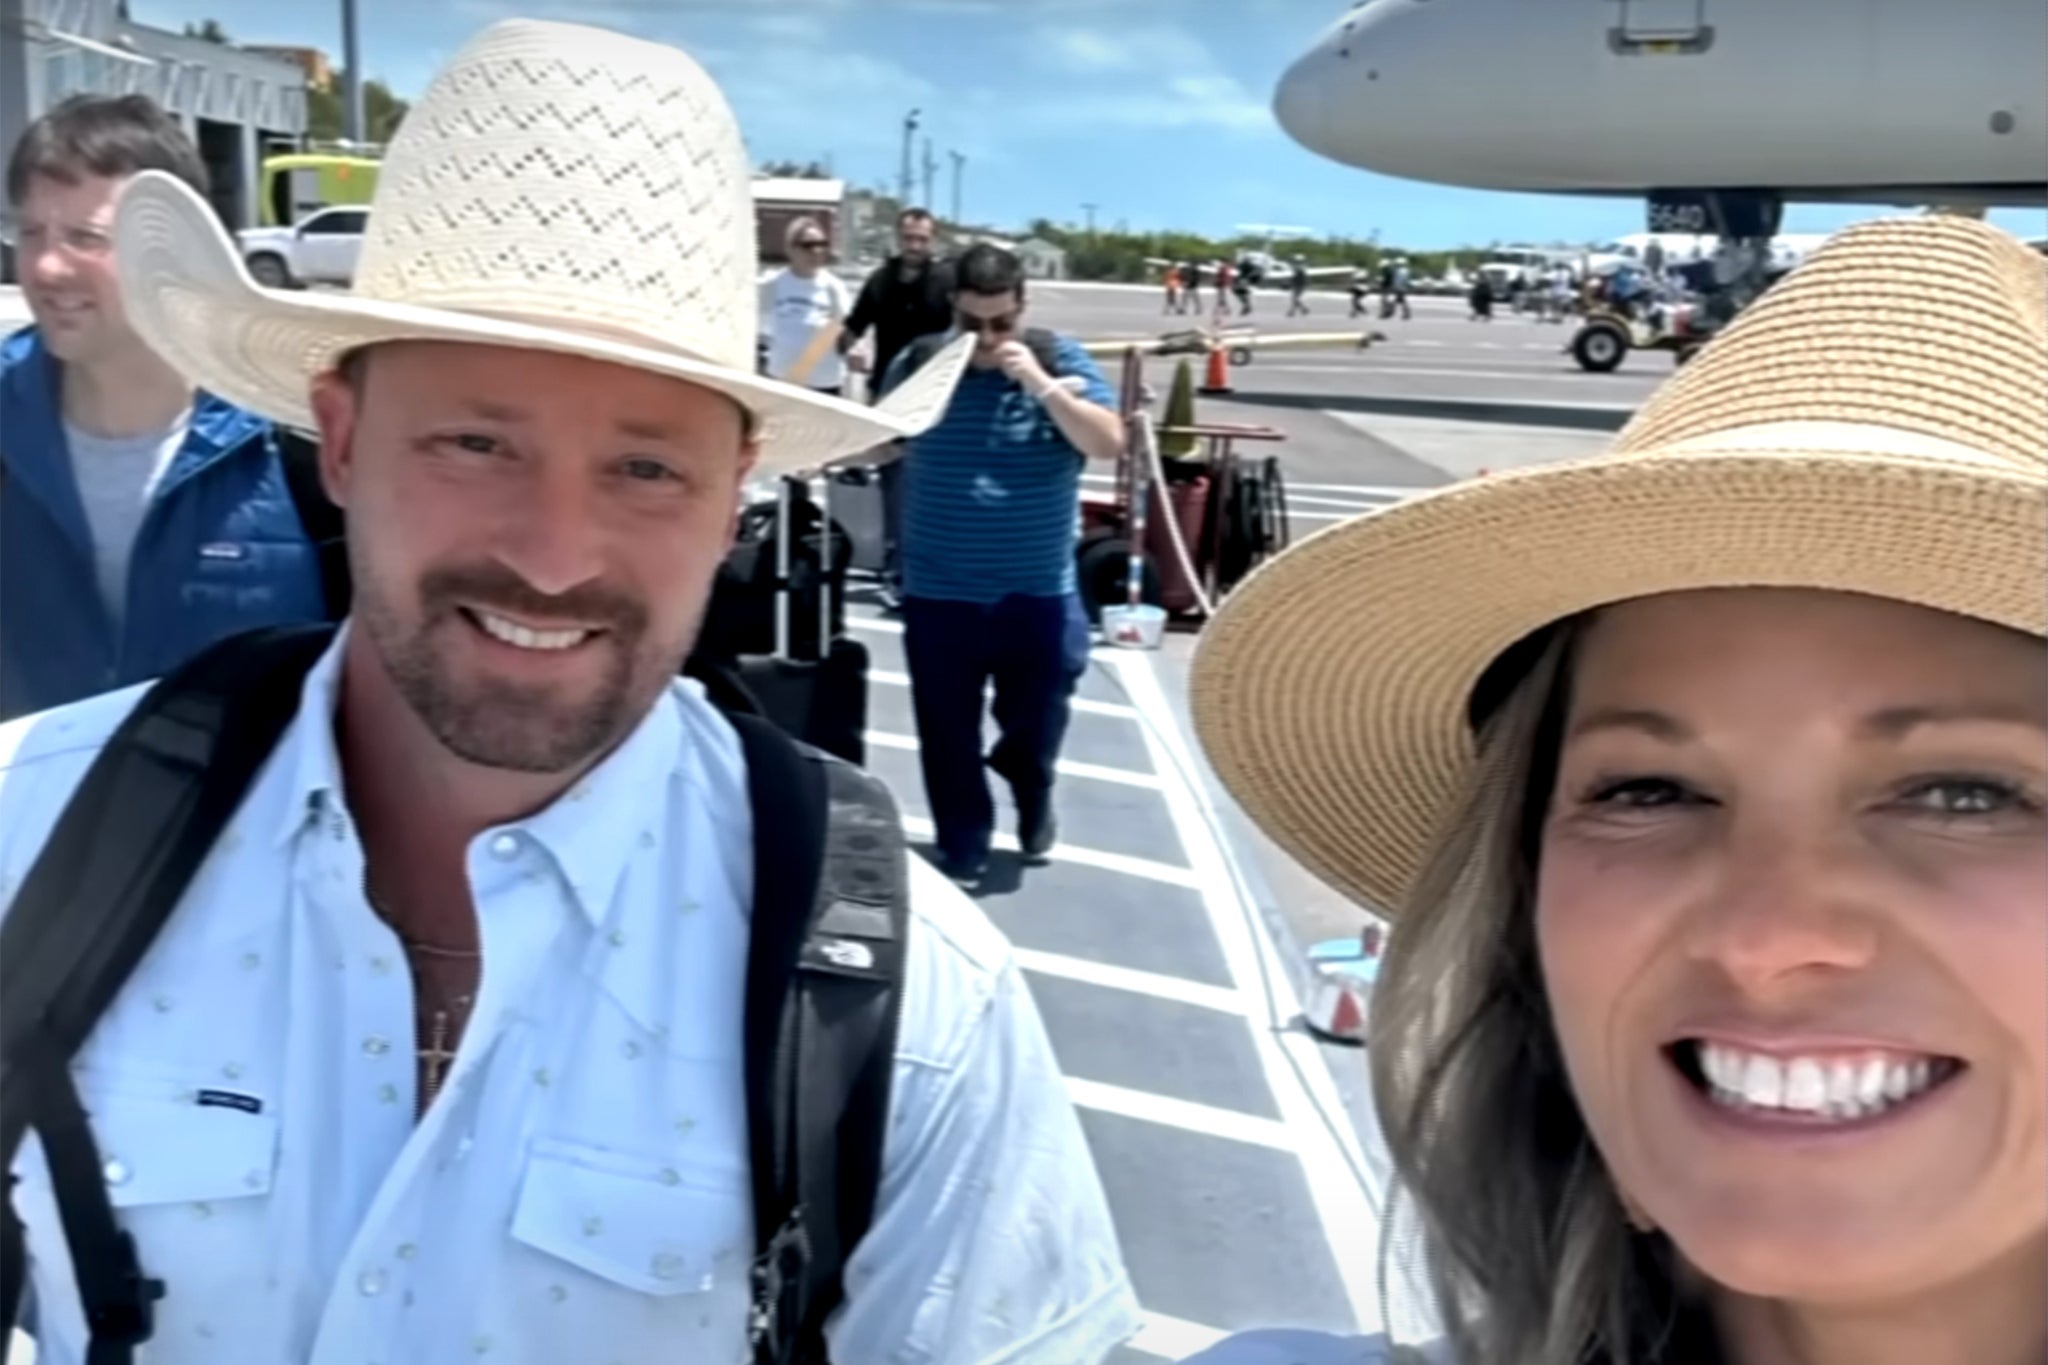 Ryan Watson and his wife Valerie Watson were arrested in April on Turks and Caicos, on similar charges of ammunition possession